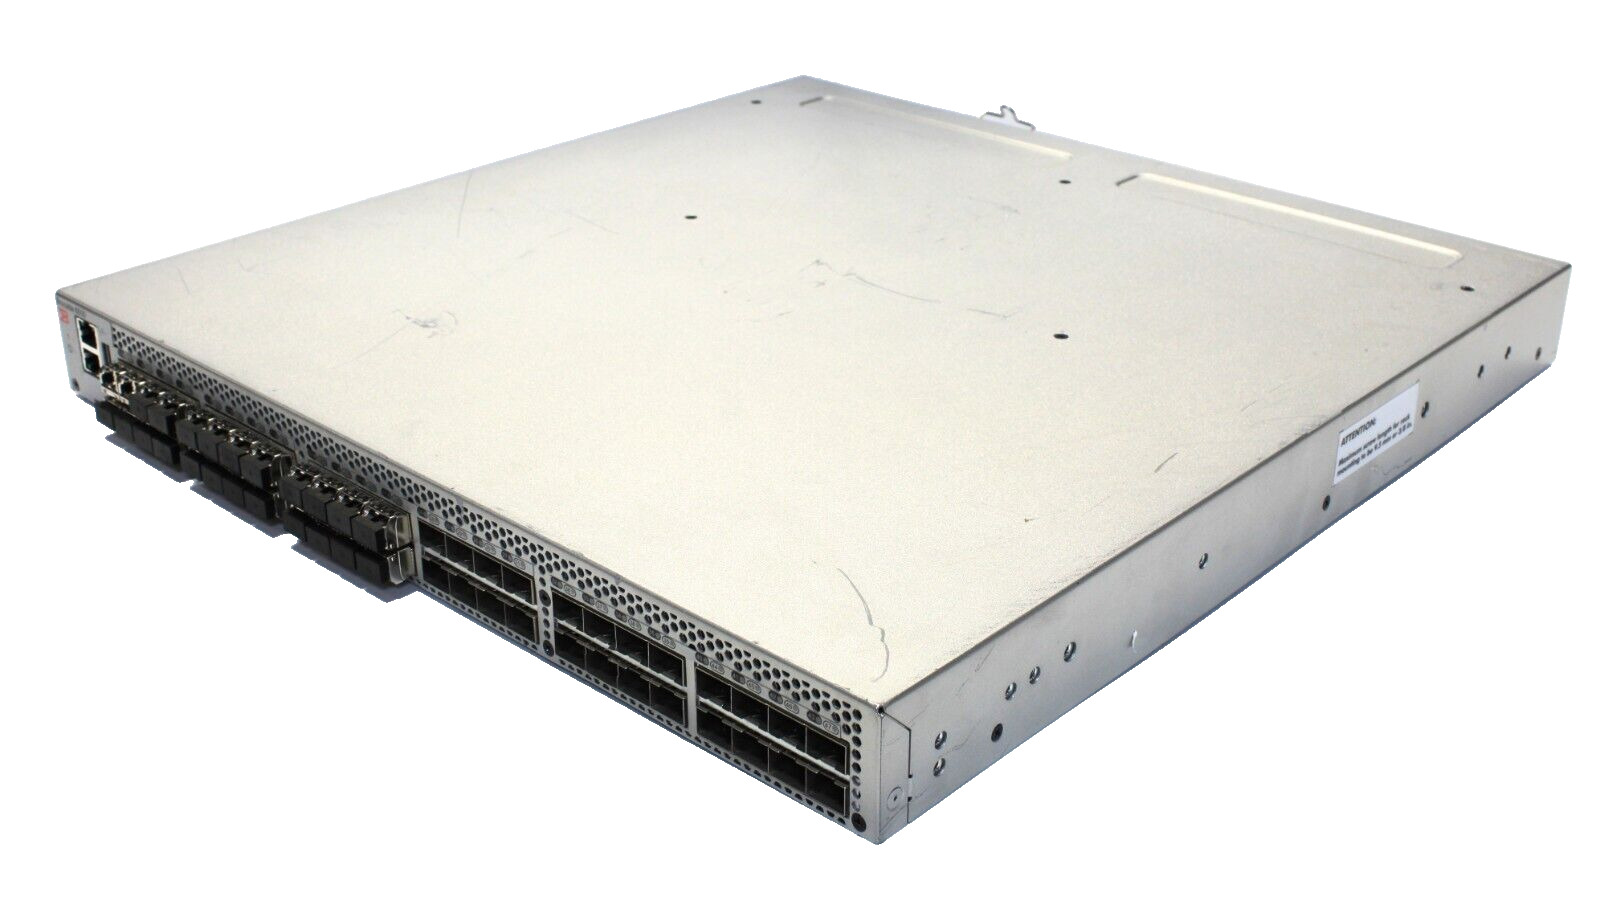 Brocade 6510 24 Ports 8Gbps Fibre Channel SAN Switch BR-6510-24-8G-R 100-240